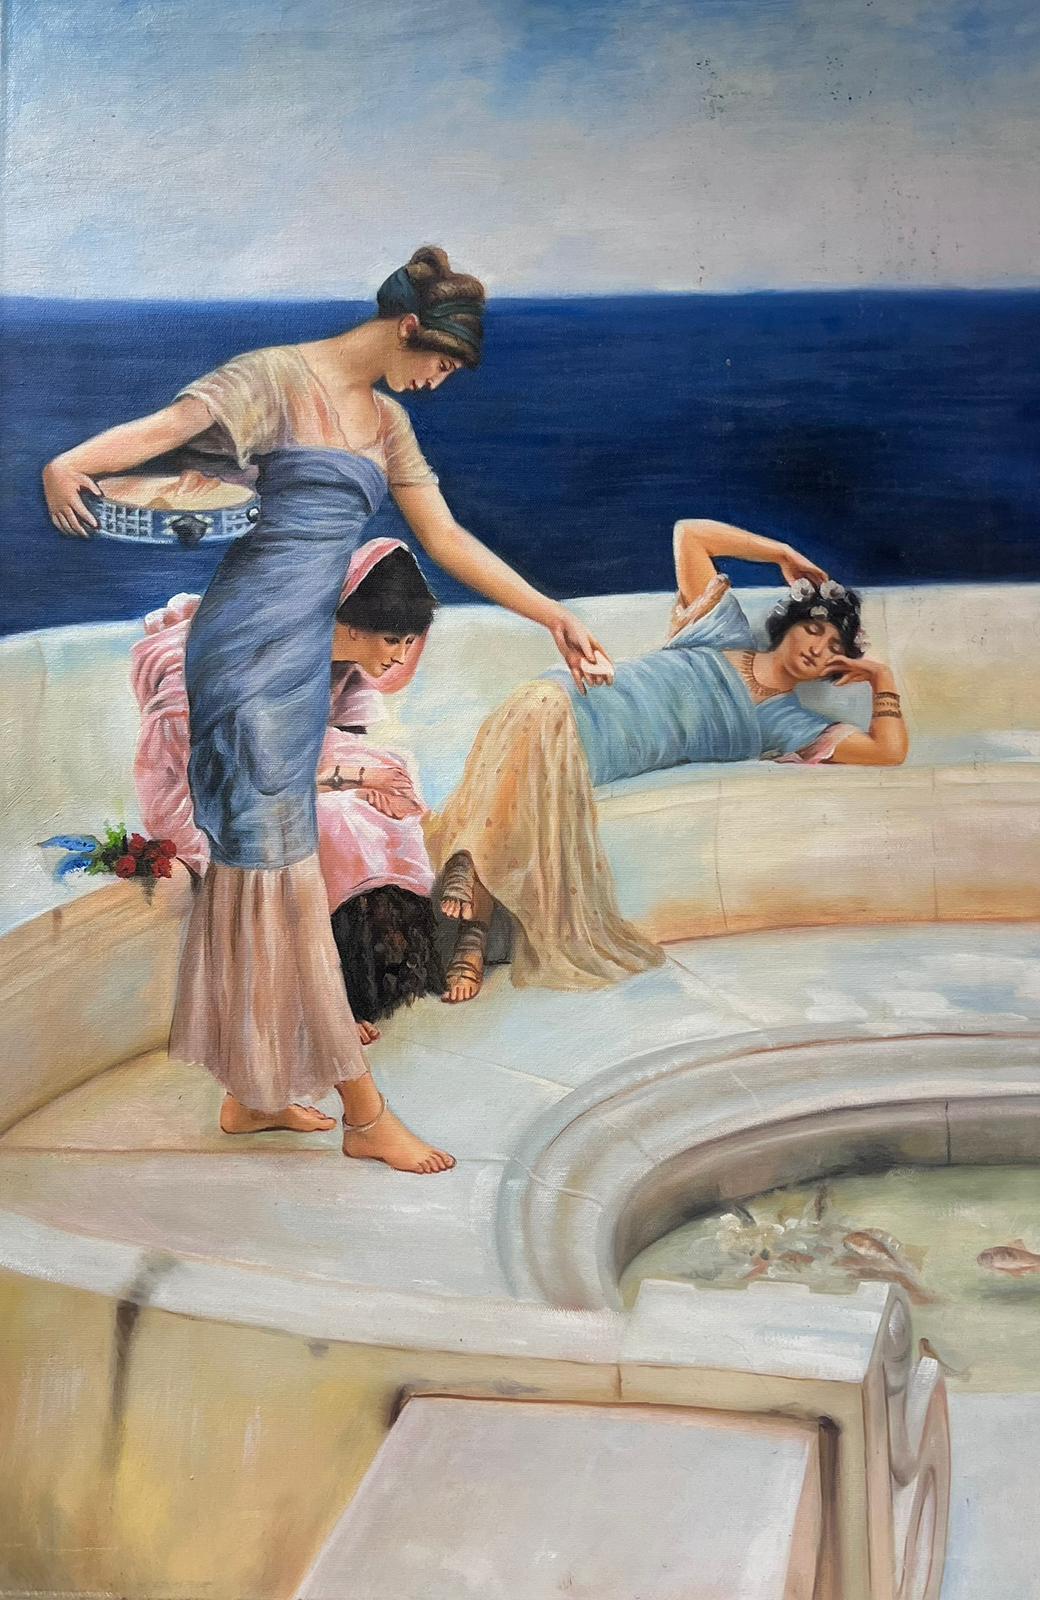 Classical Grecian Maidens on Terrace by Carp Pond Large Oil Painting on Canvas